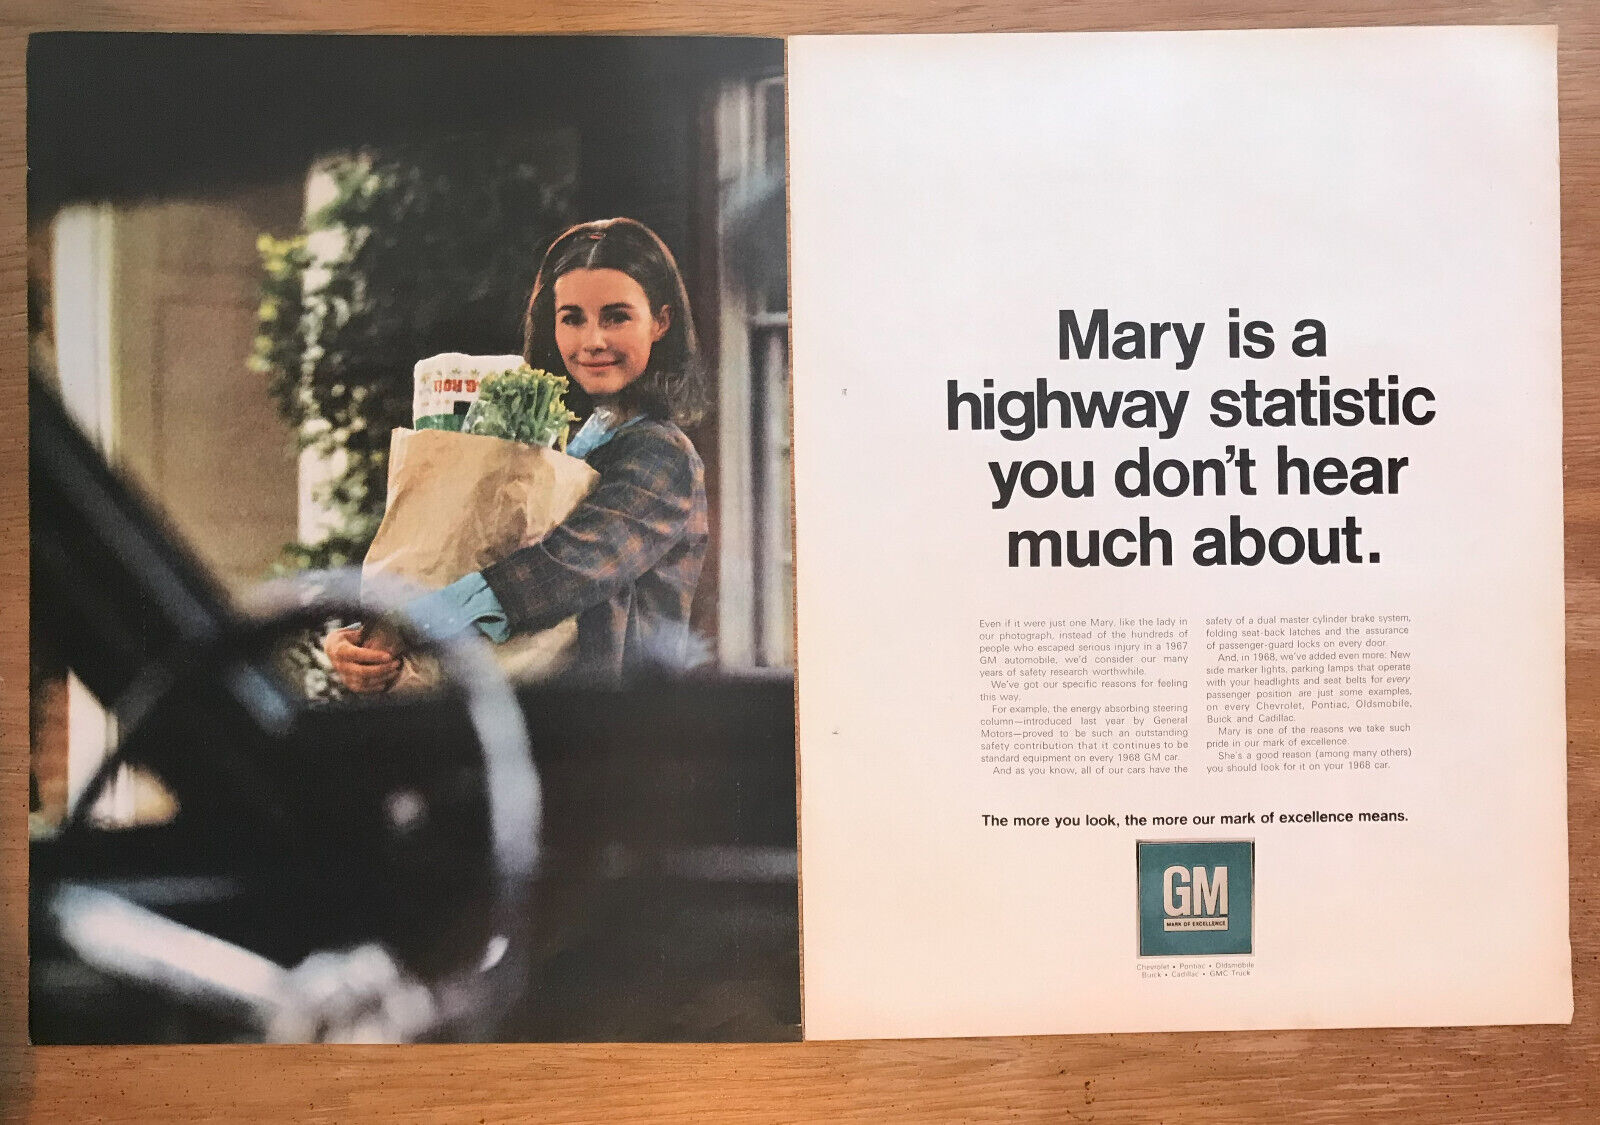 1967 General Motors Car Safety, Smith-Corona Mail Call, Elgin Watches Print Ads